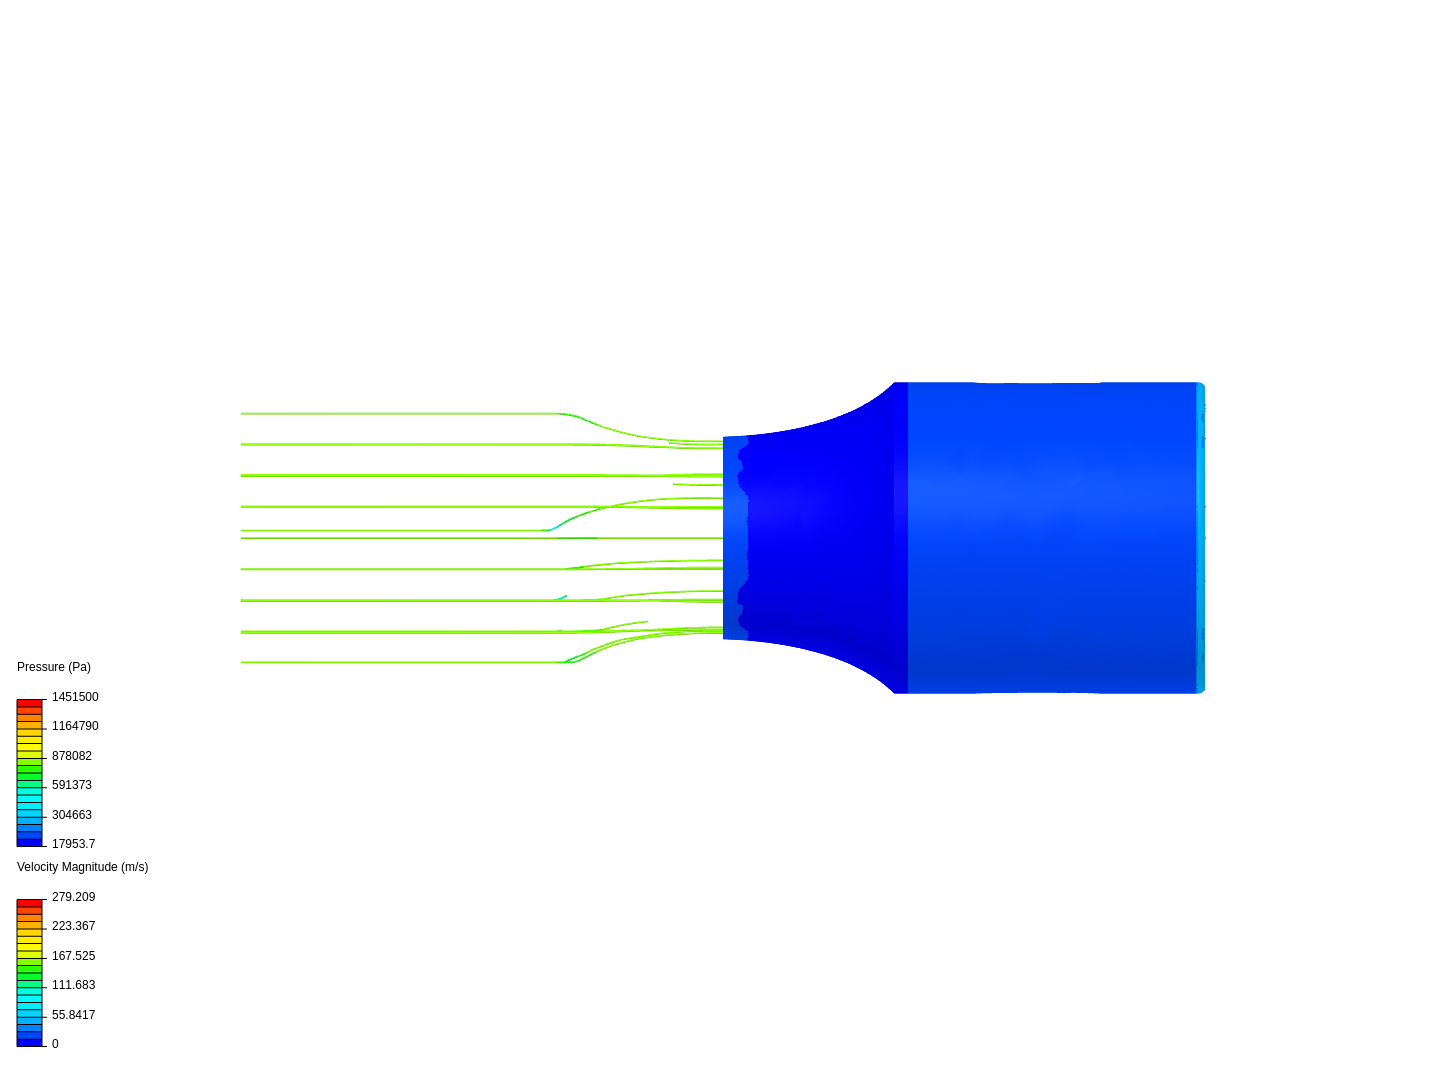 Bernoulli's Theory Attempt 3 image